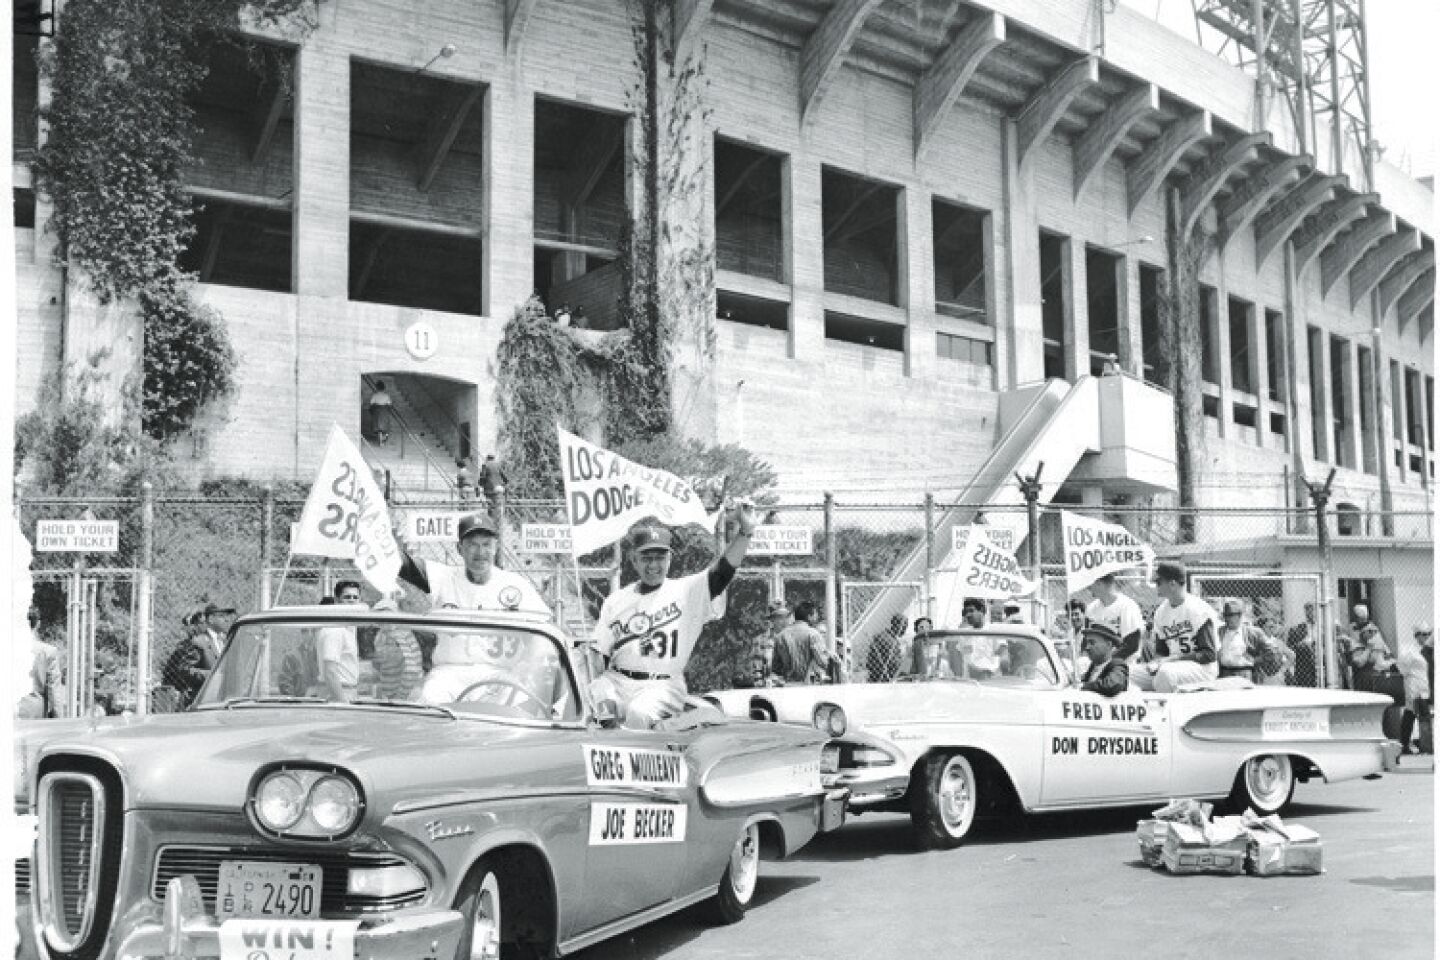 1958: The Dodgers